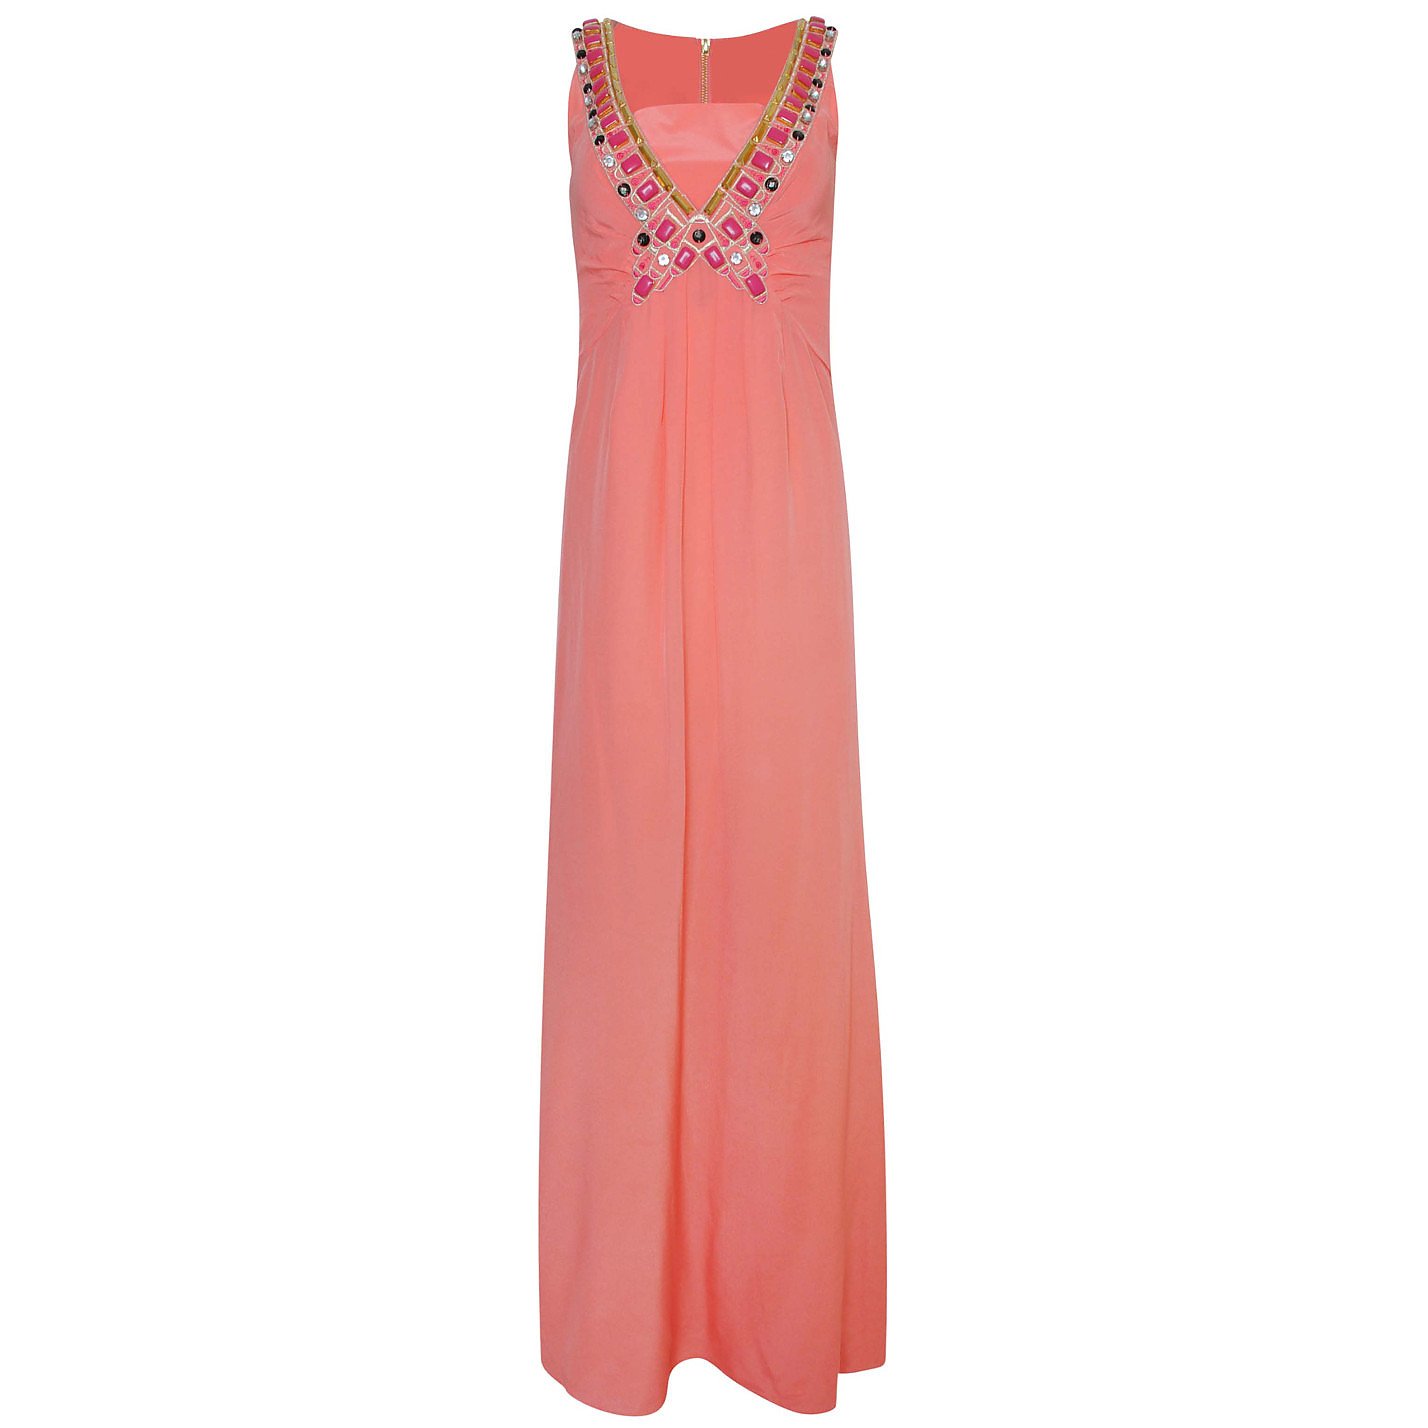 ALICE by Temperley Embellished Maxi Dress